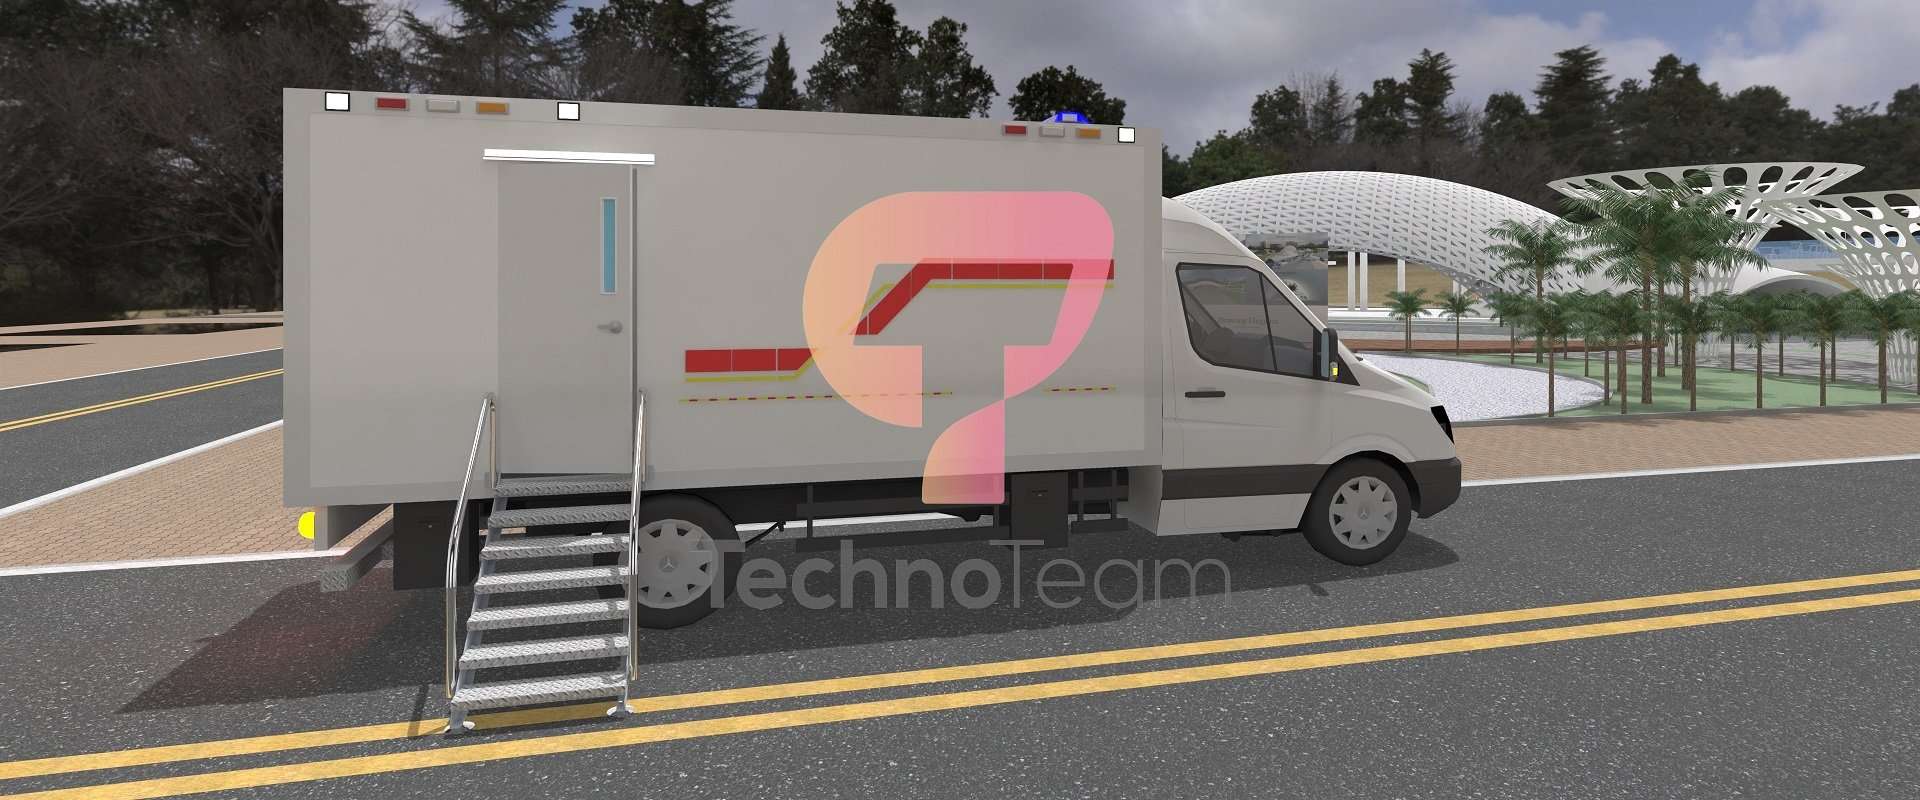 Mobile Solutions,Expandable container,Trailer Based Container,Autolift container,Foldable Container,Mobile Surgery,Trailer Based Multi clinic,field hospital,ICU